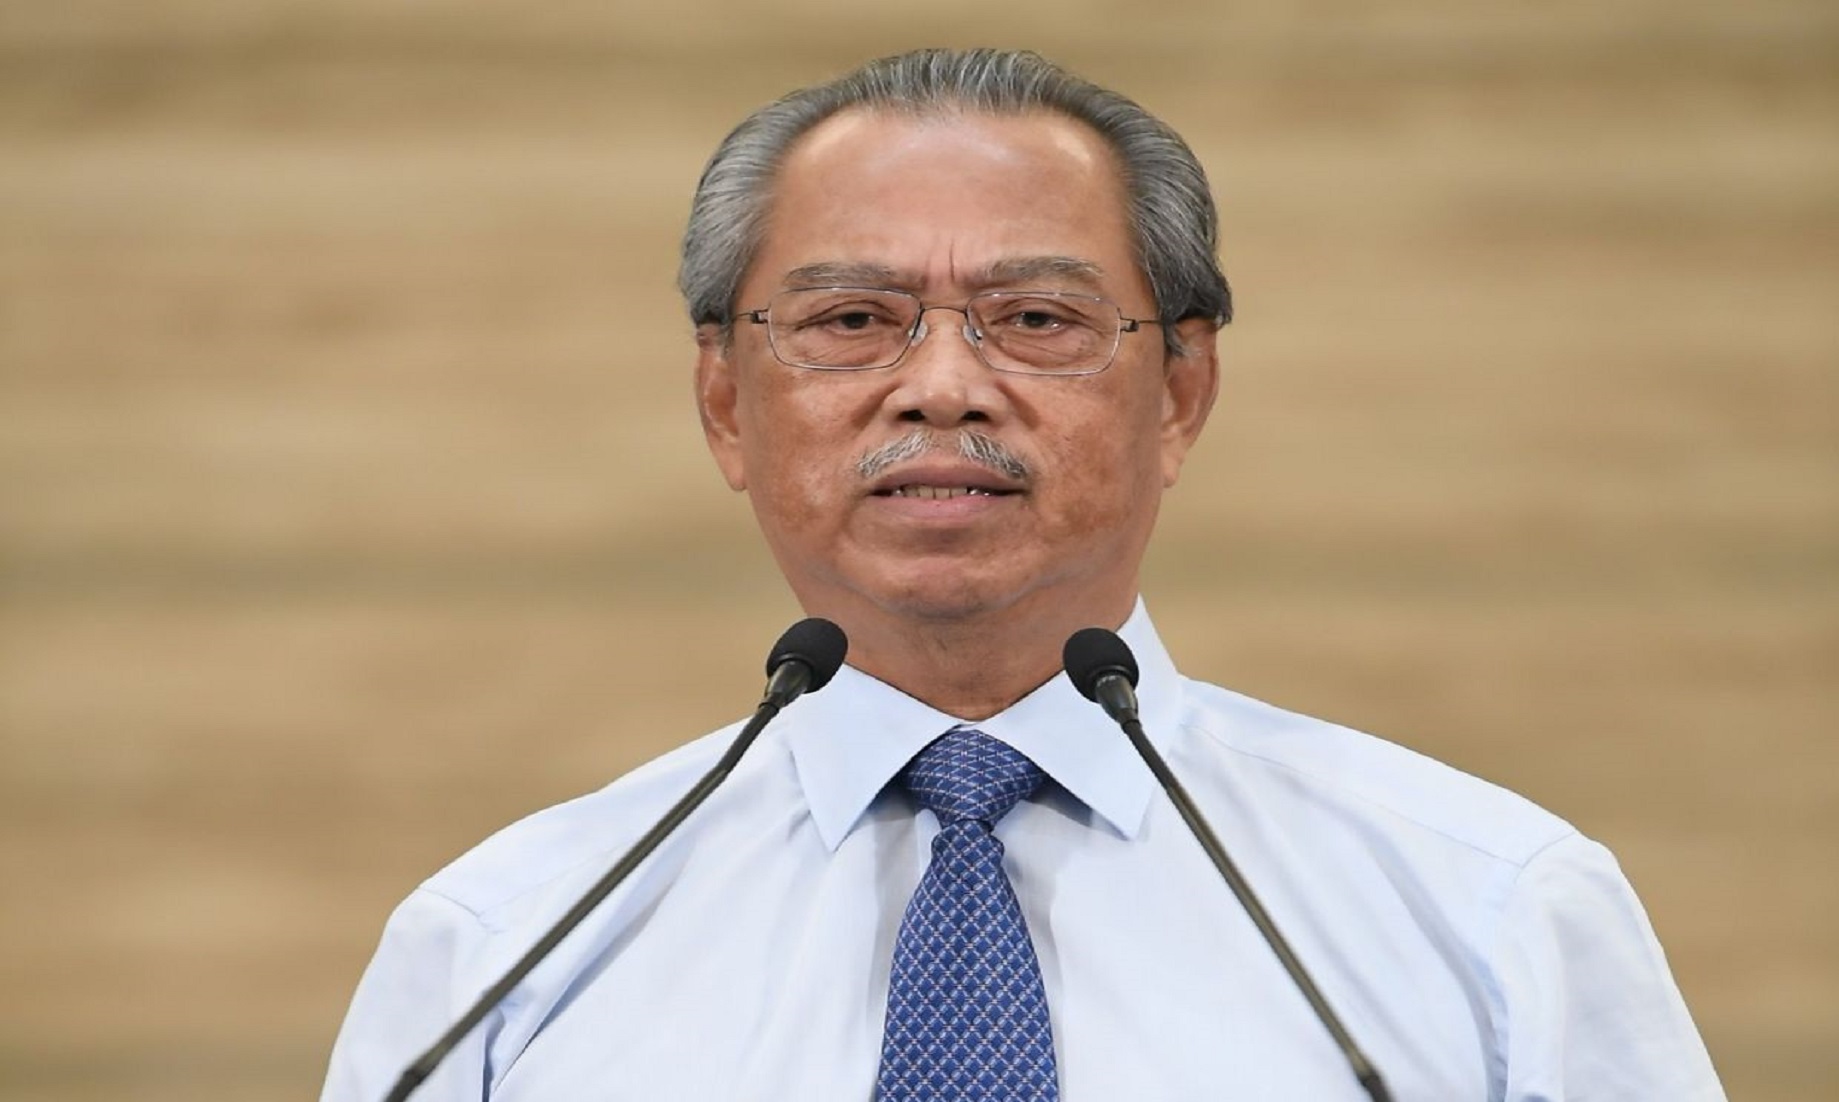 Updated: Almost all economic sectors, business activities to resume in Malaysia May 4 – PM